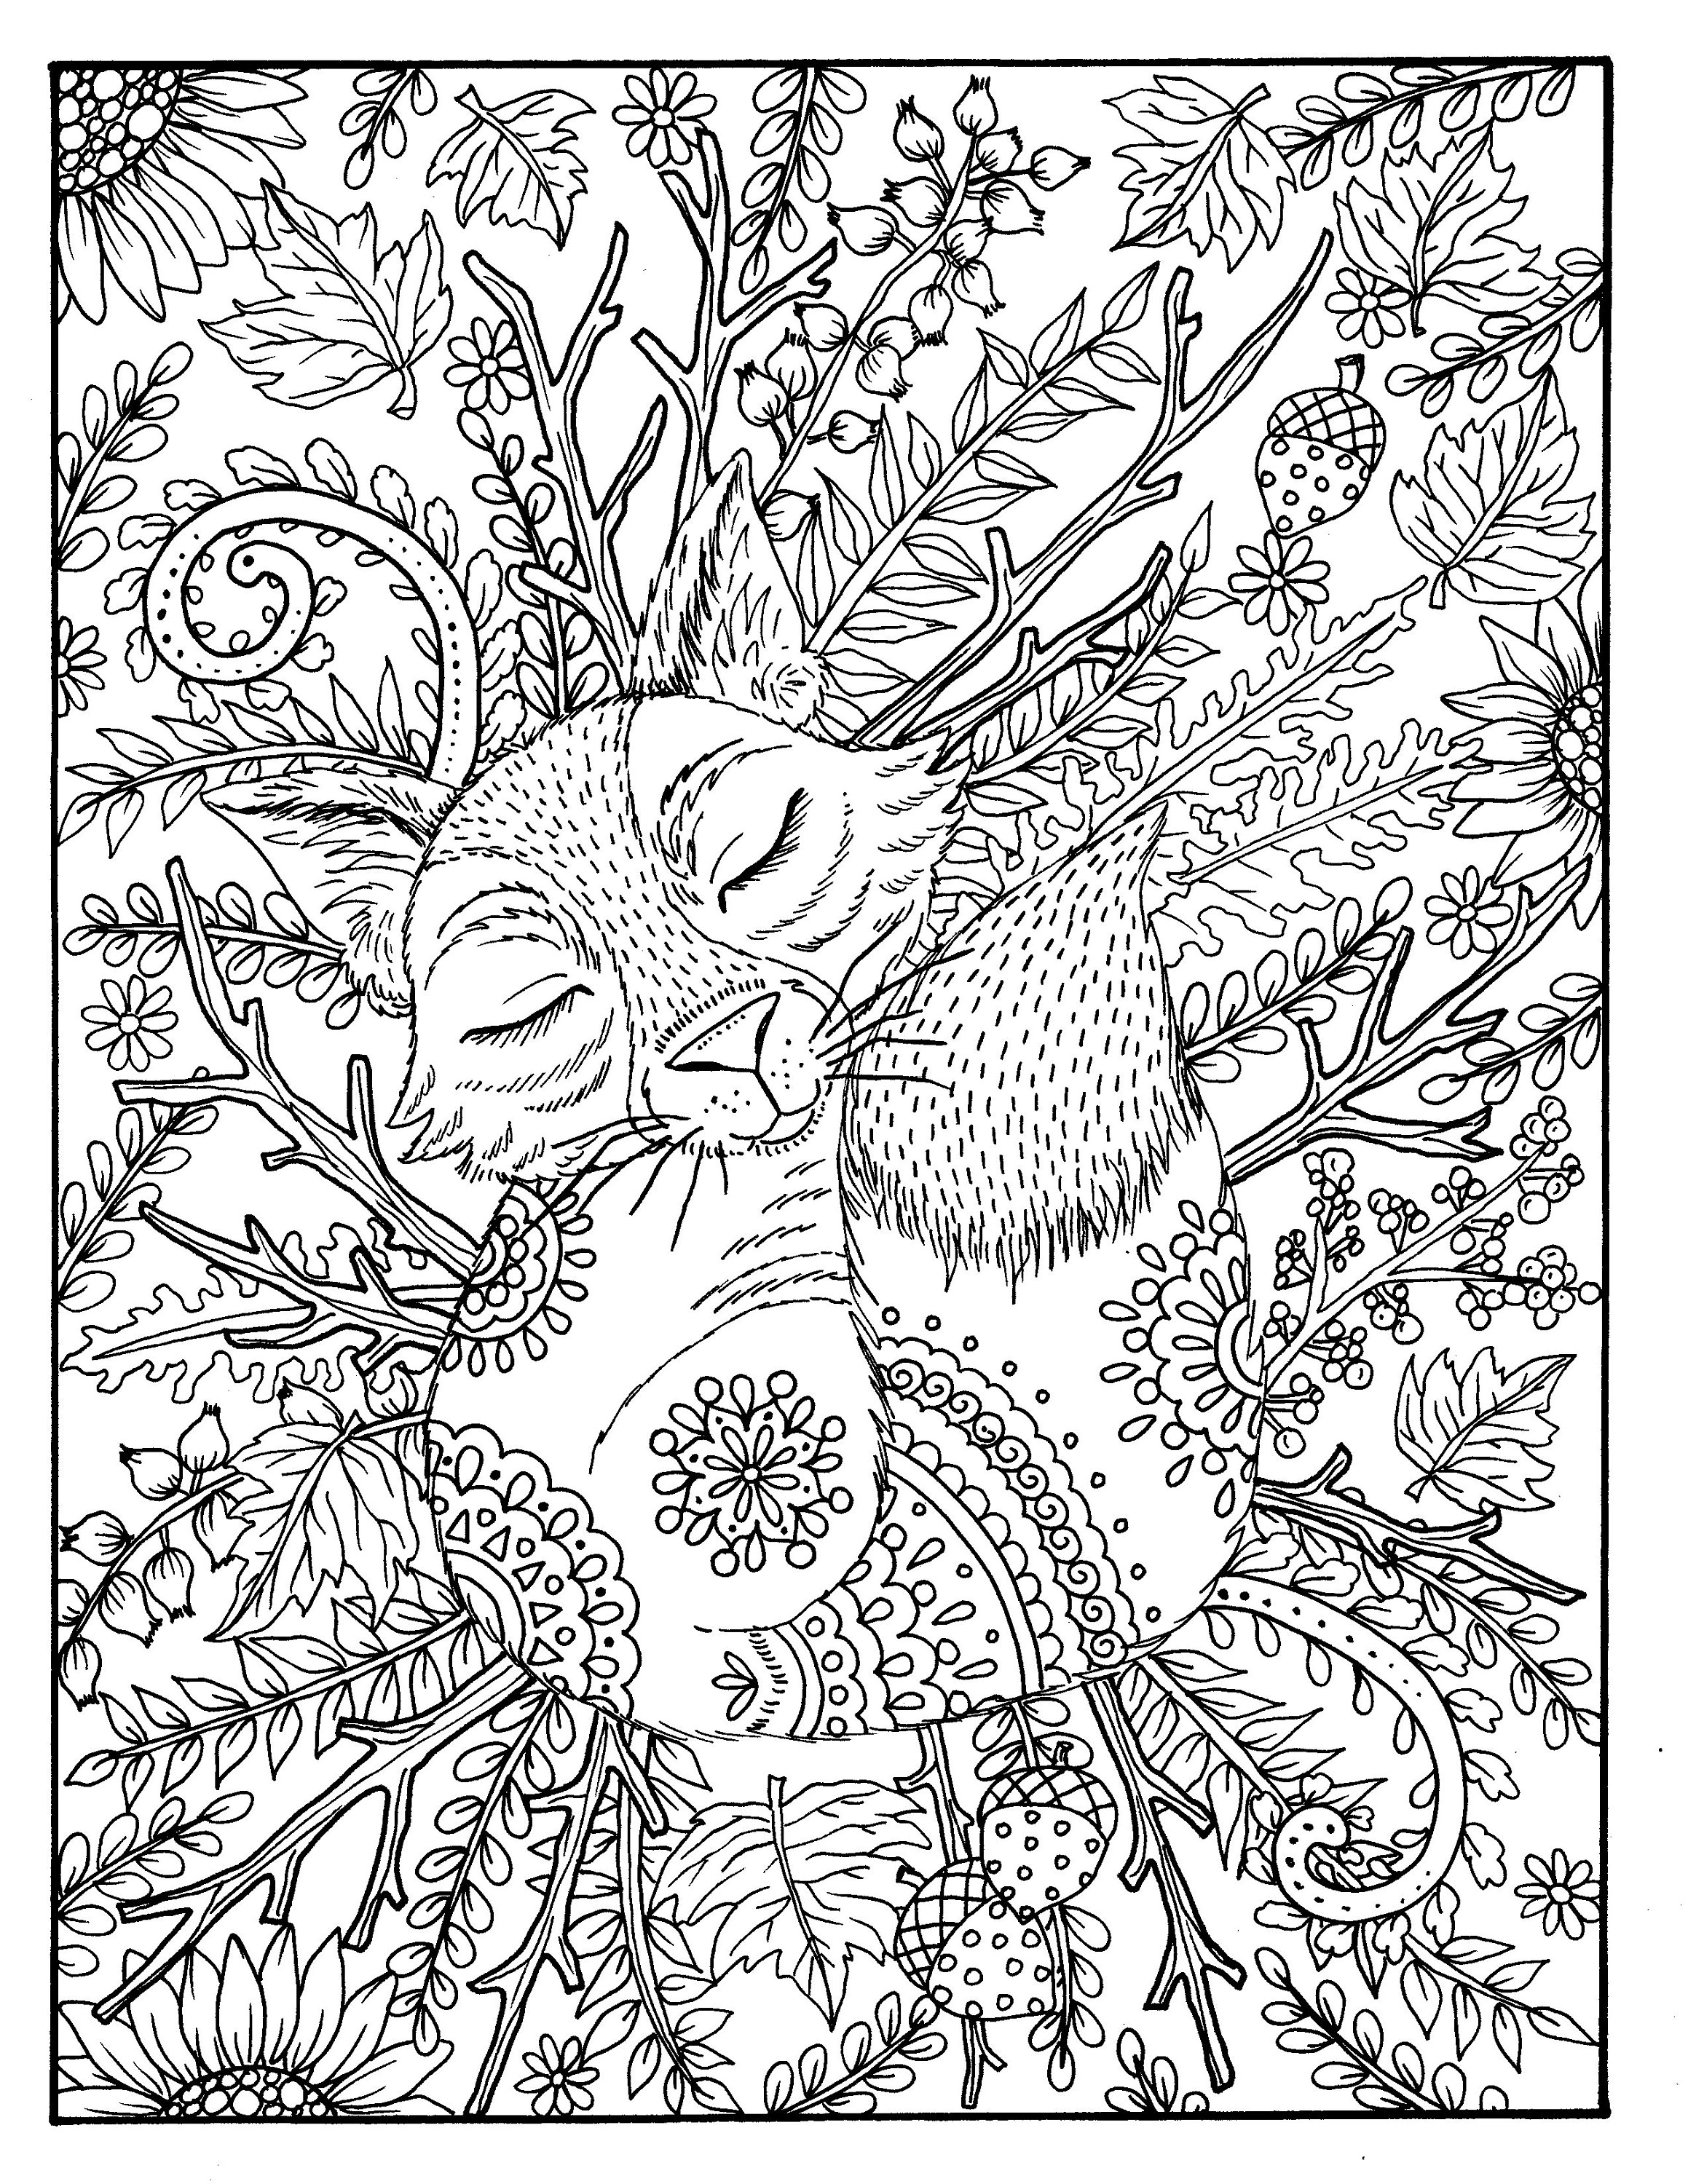 Fall fox coloring page digital coloring adult coloring digi thanksgiving pages to color